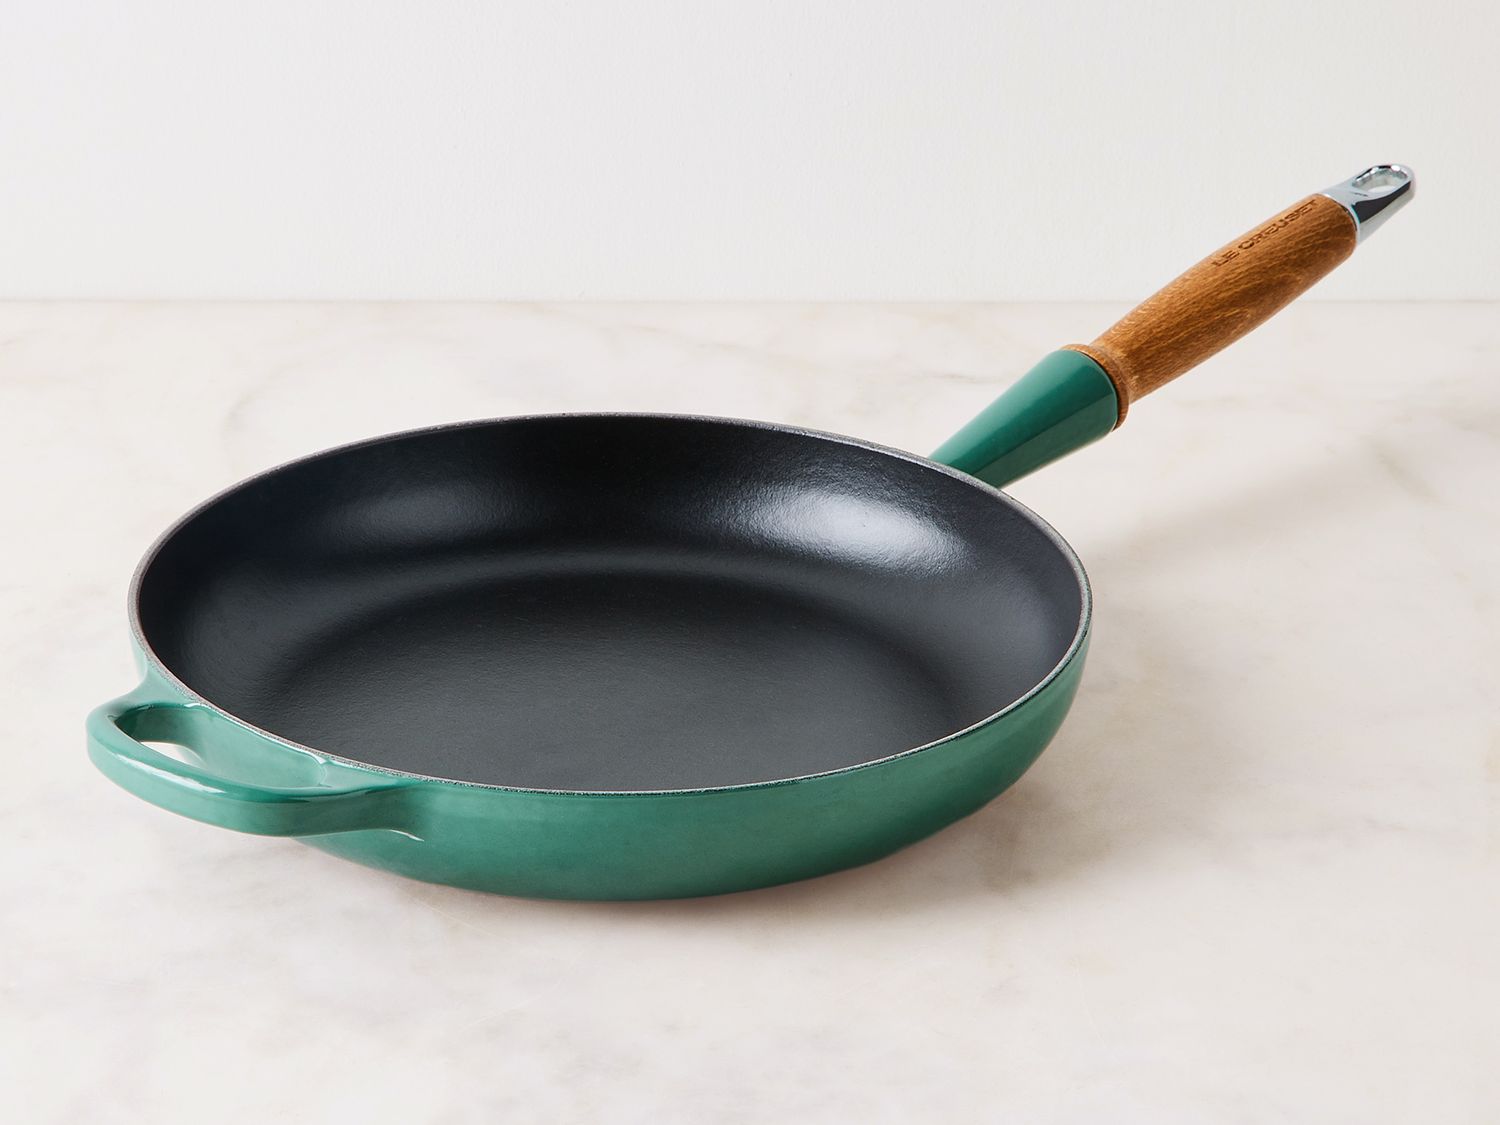 Le Creuset Enameled Cast Iron Signature Skillet, 9-Inch, 7 Colors on Food52